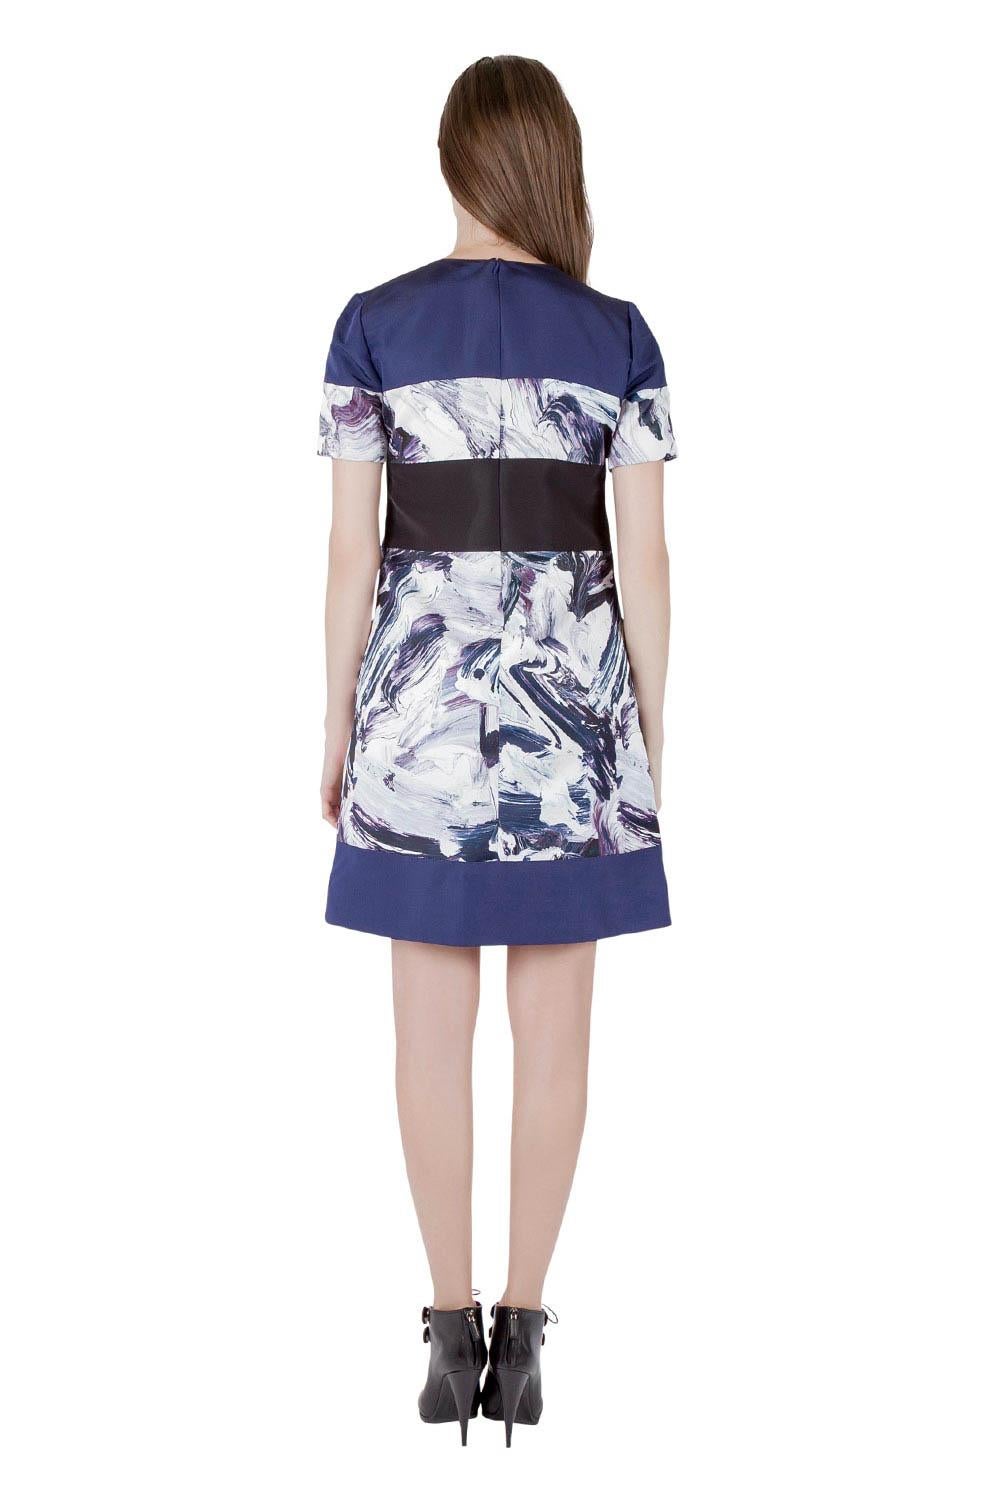 The shift dress is by Prabal Gurung and is tailored from a fine fabric blend. The multicolor piece features a brush stroke print with contrasting trim on the waistline. Black booties will perfectly complement this beautiful creation.

Includes: The